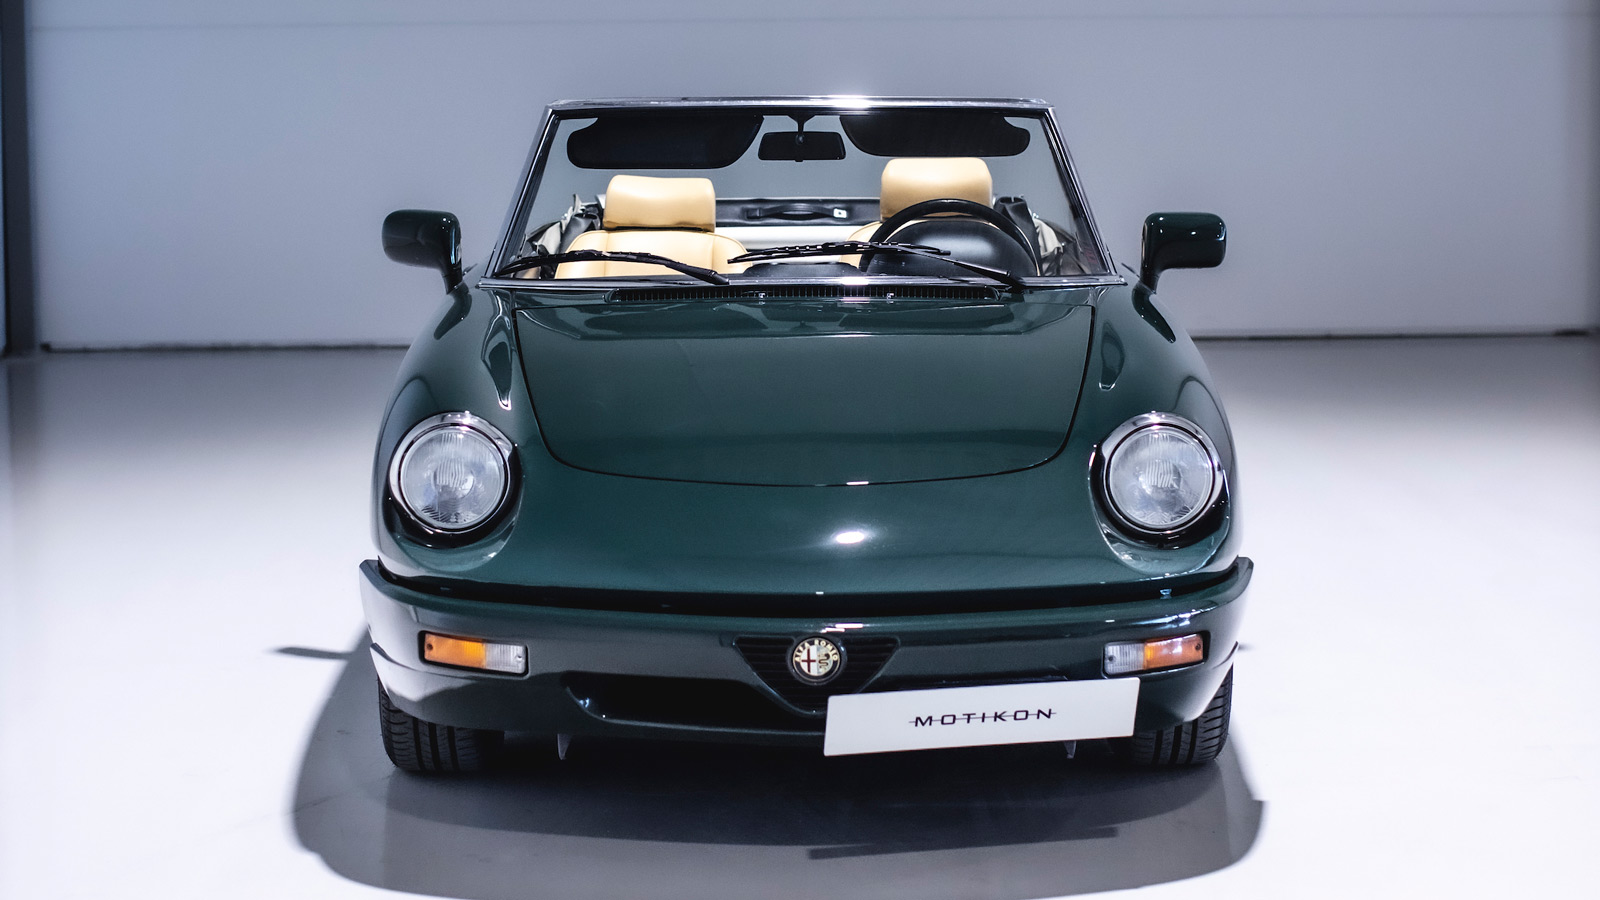 This fine example of Alfa Romeo Spider is available to view in our showroom in Uppsala, Sweden